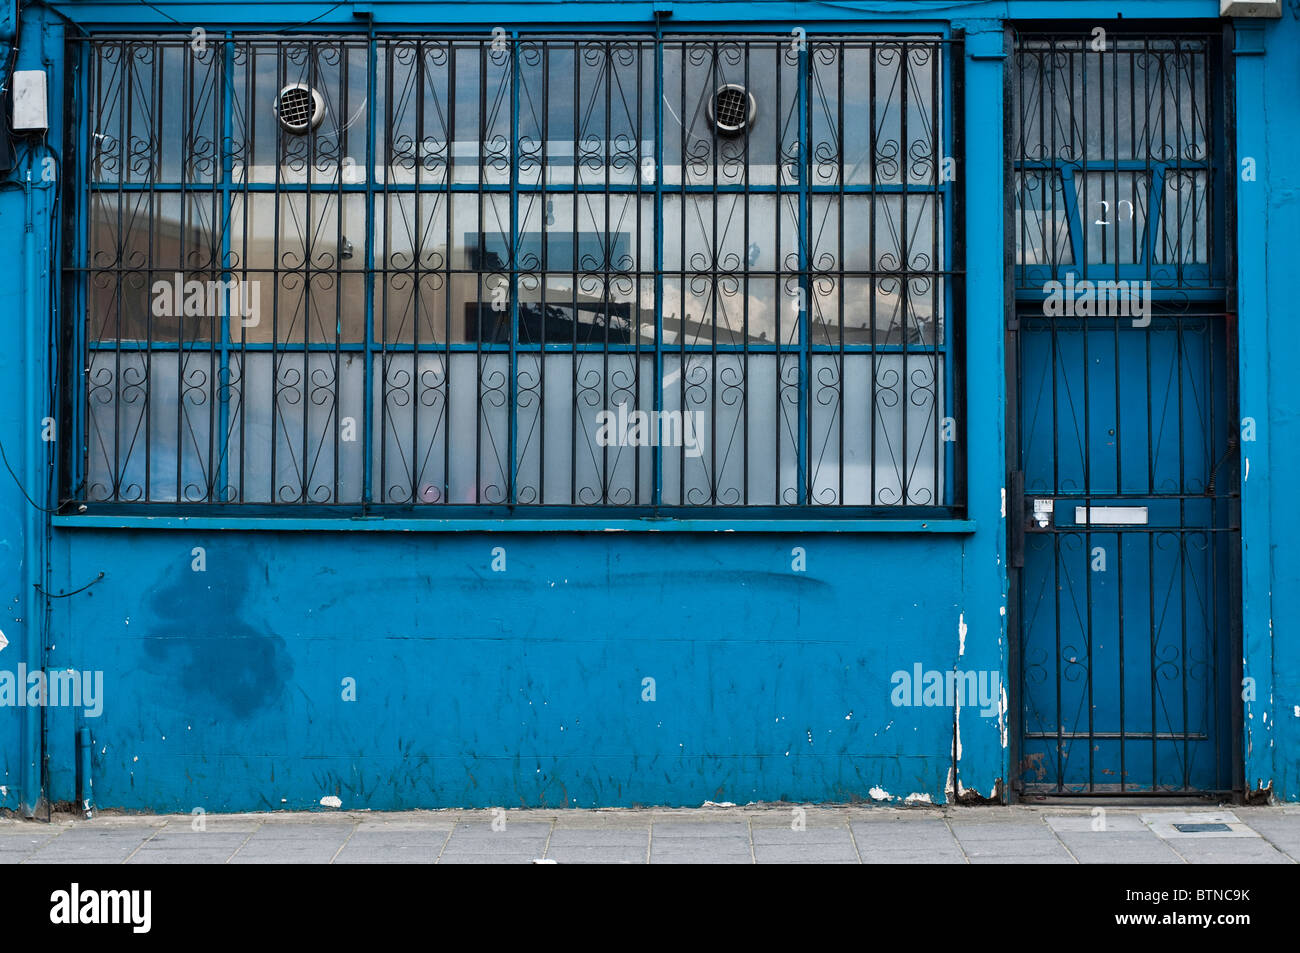 A blue building in Dalson with bars on the door and windows for security on the ground floor. Stock Photo